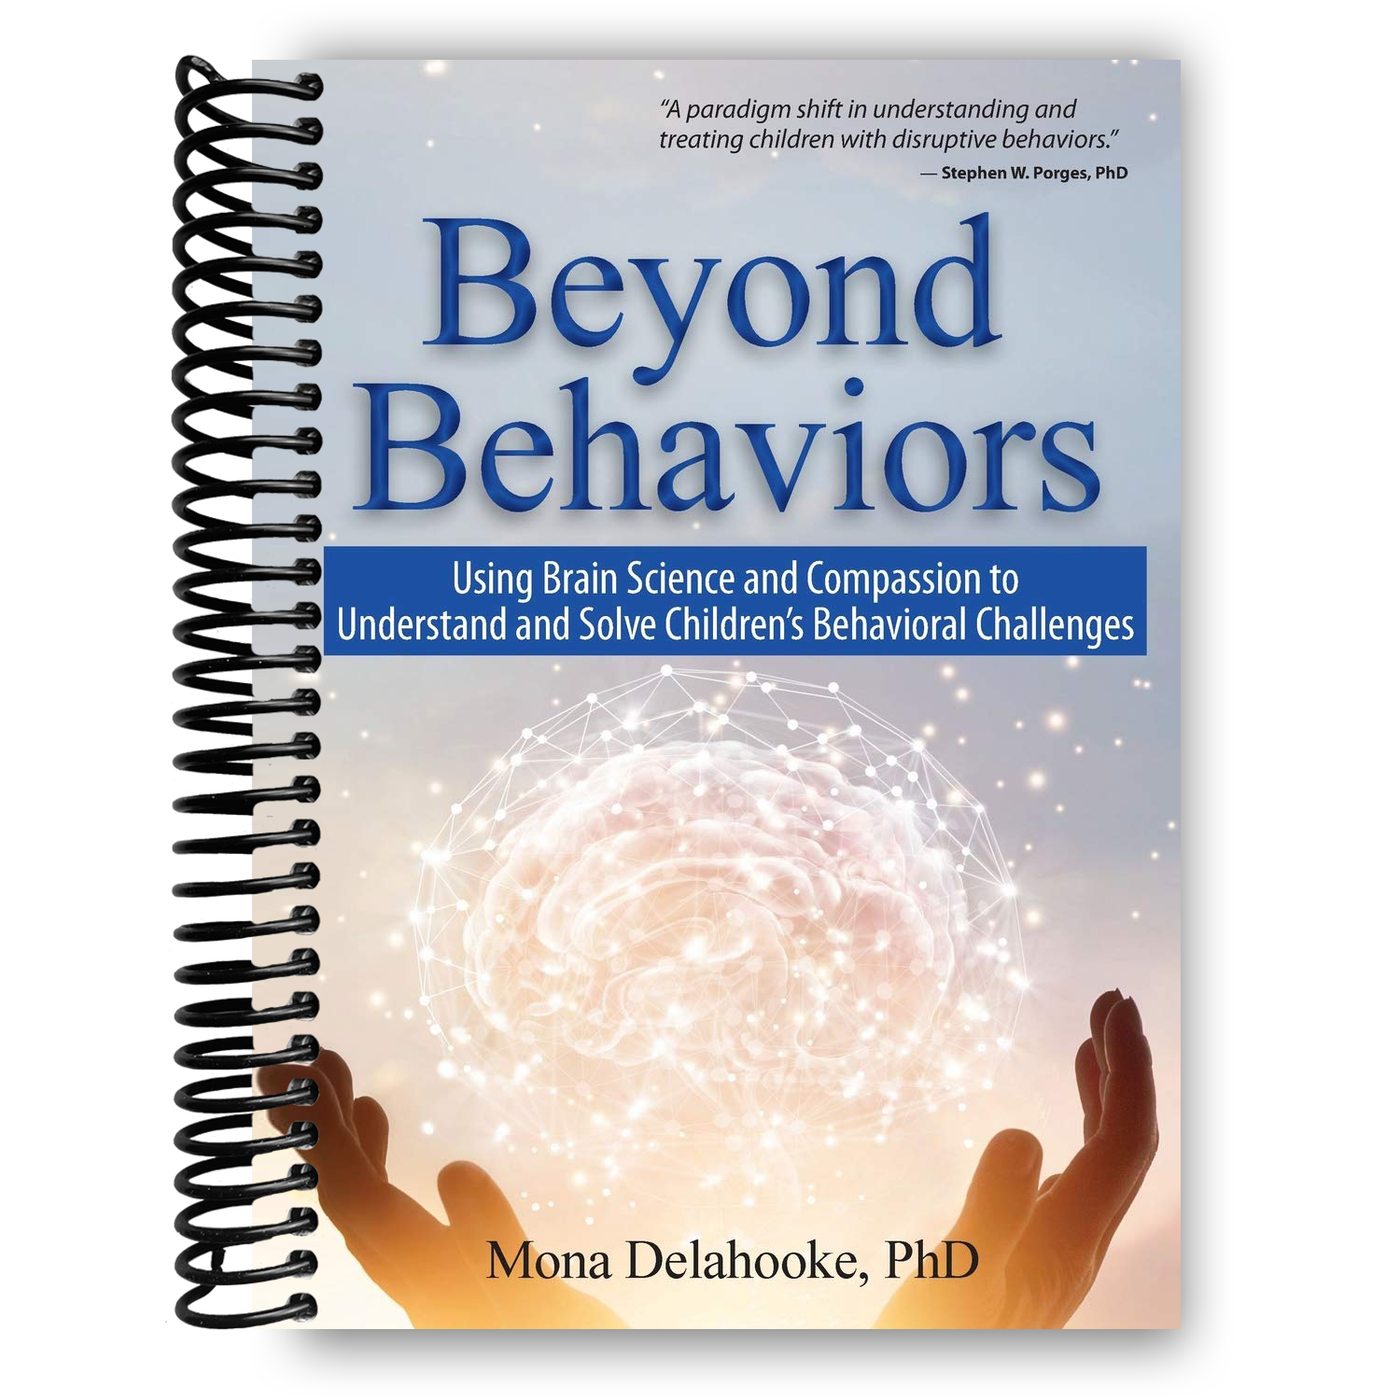 Beyond Behaviors: Using Brain Science and Compassion to Understand and Solve Children's Behavioral Challenges (Spiral Bound)